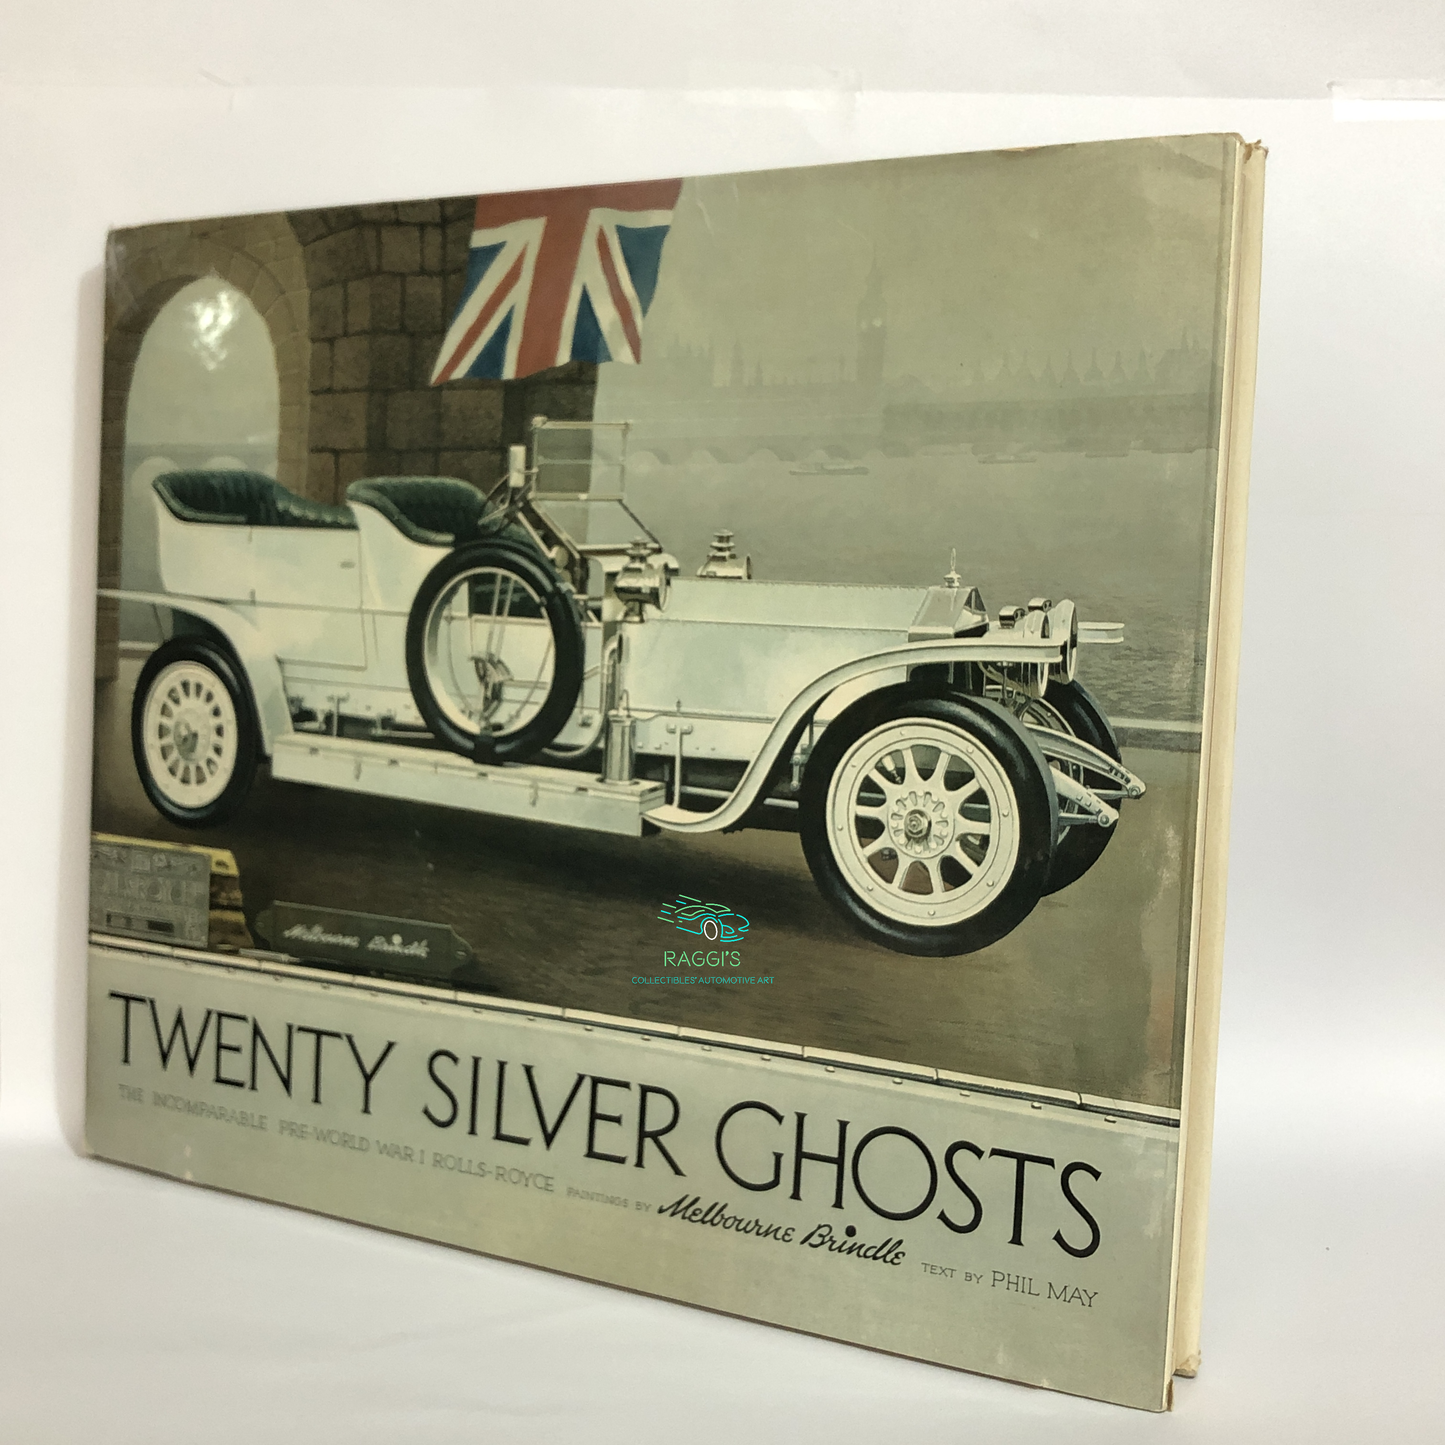 Rolls-Royce, Book Twenty Silver Ghost with Illustrations and Drawings by Melbourne Bindle and text by Phil May Year 1971